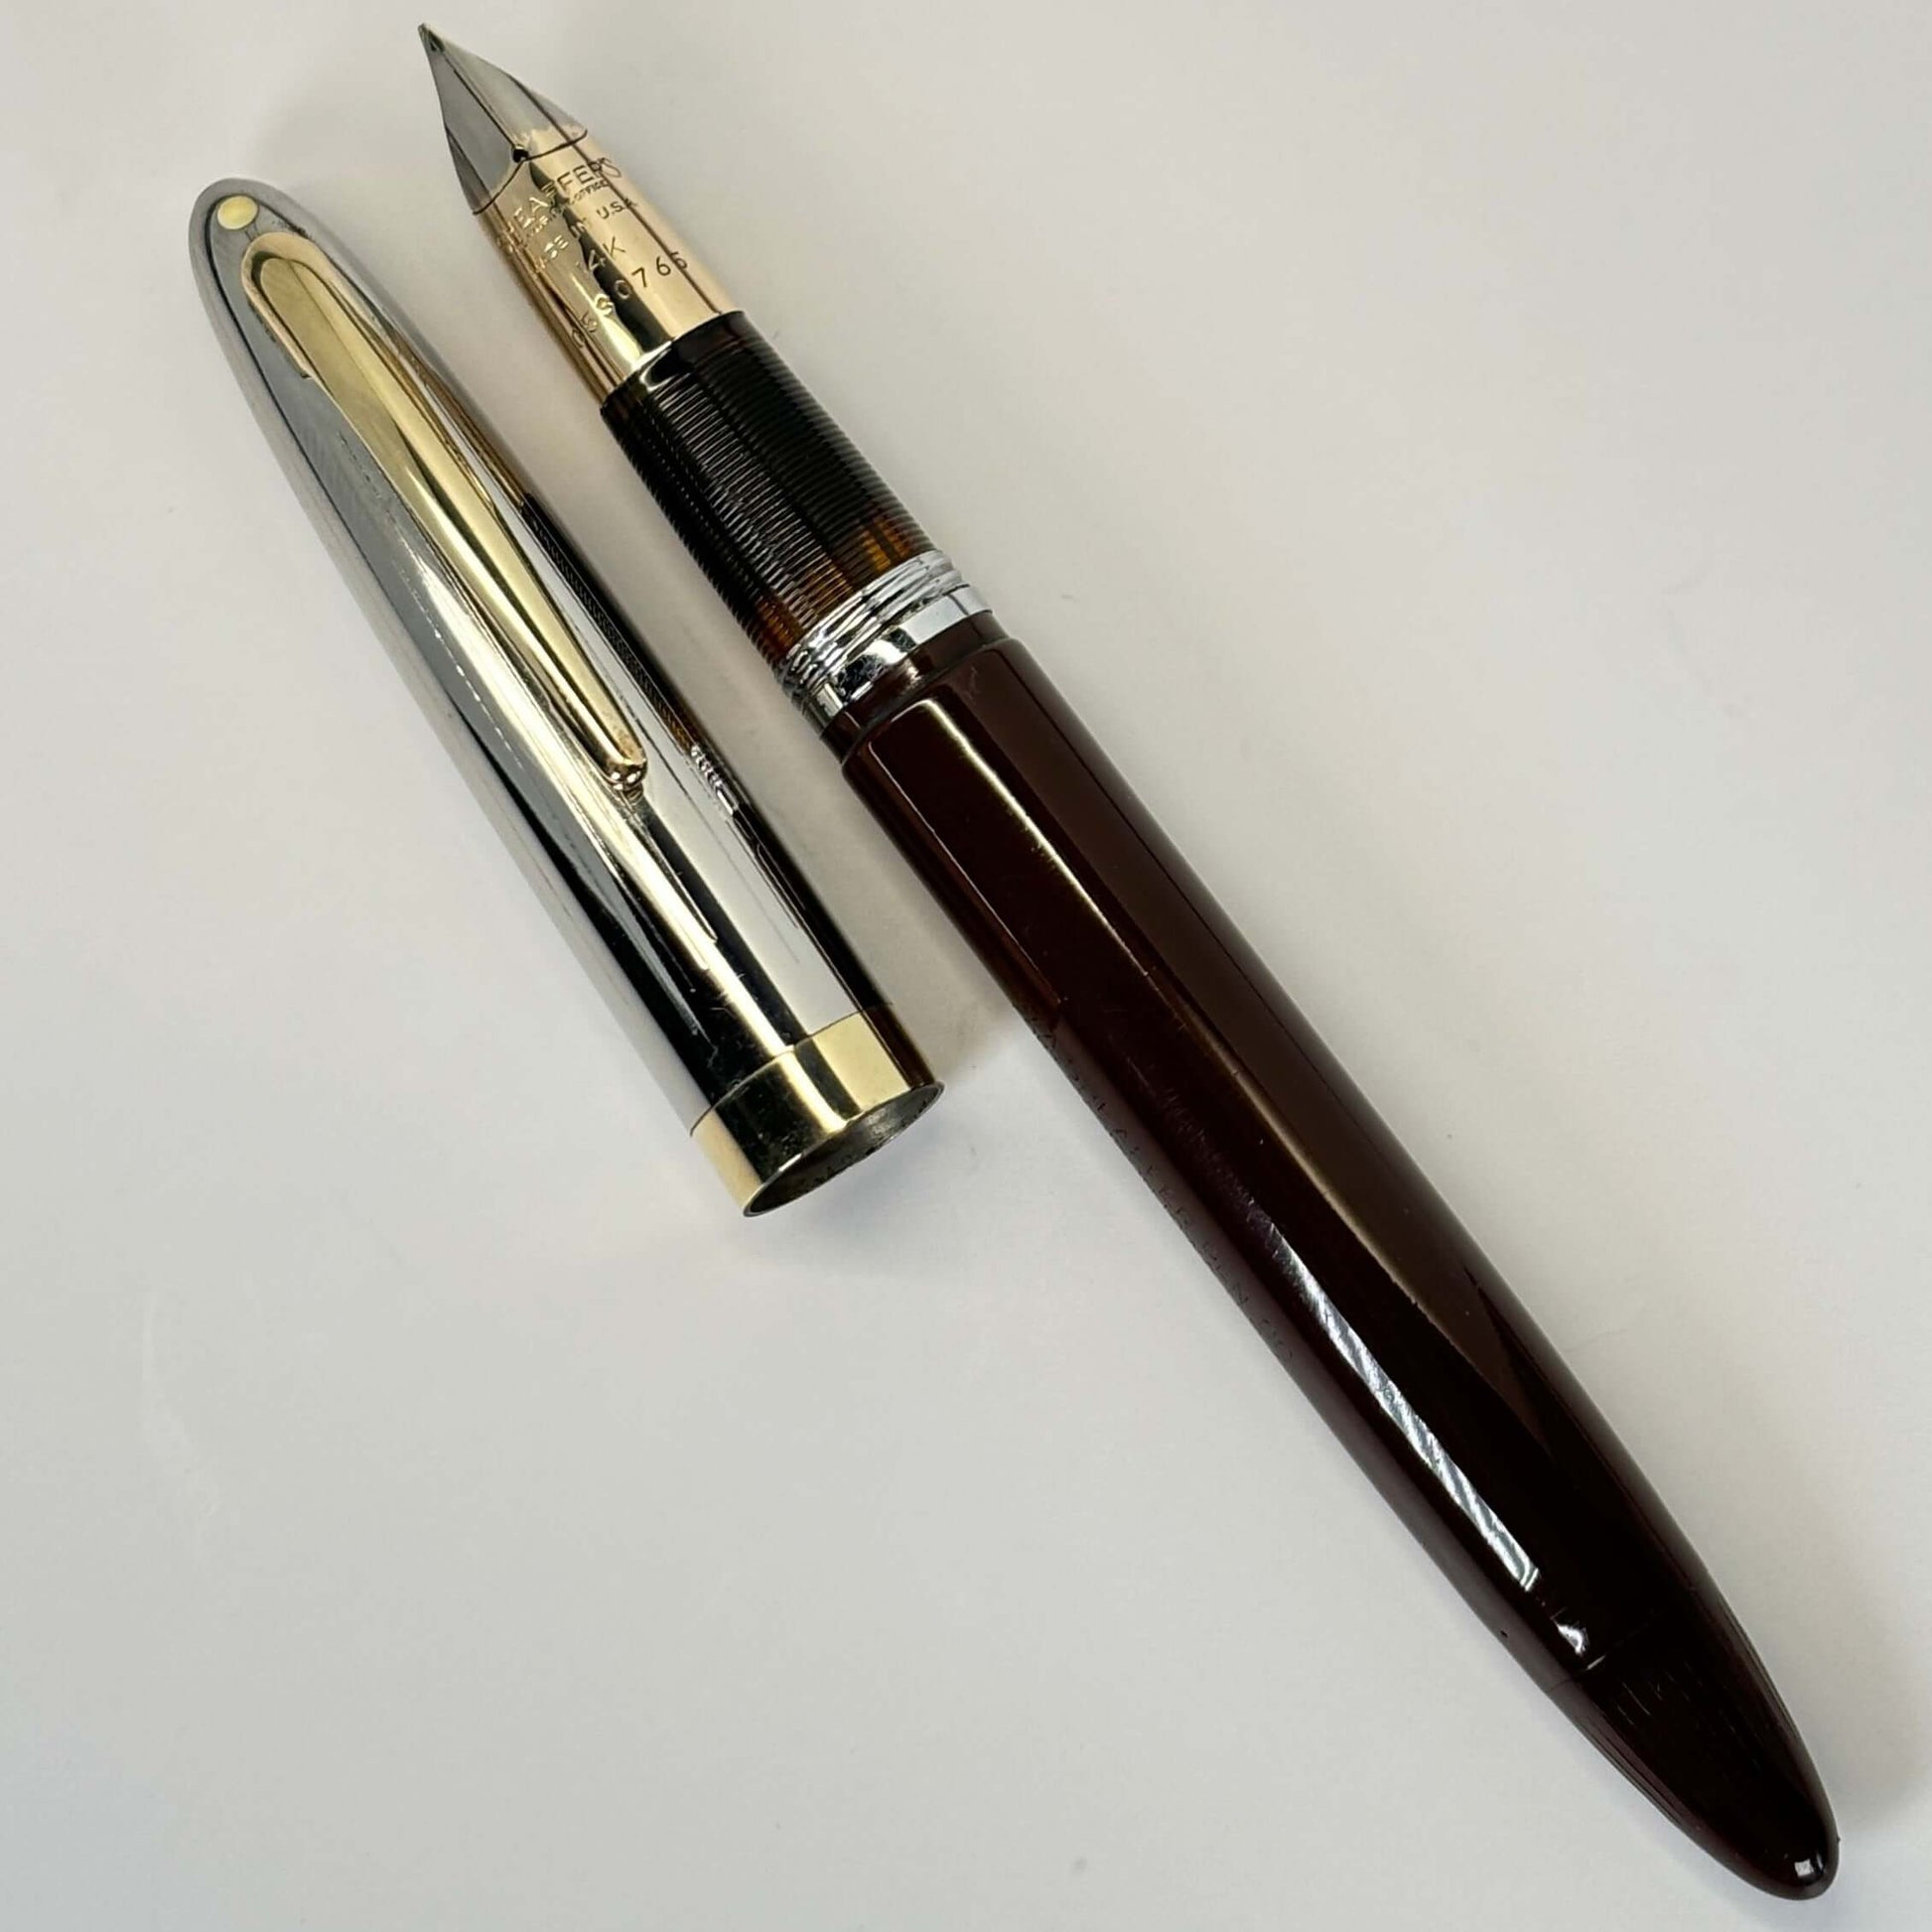 Sheaffer Touchdown; Burnt Umber Brown, Large Two-tone 14K nib. Name/Type: Sheaffer Touchdown Manufacture Year: 1949 Length: 5 1/4 Filling System: Touchdown; new sac and seals Color/Pattern: Burnt Umber Brown with two-tone cap Nib Type/Condition and remark